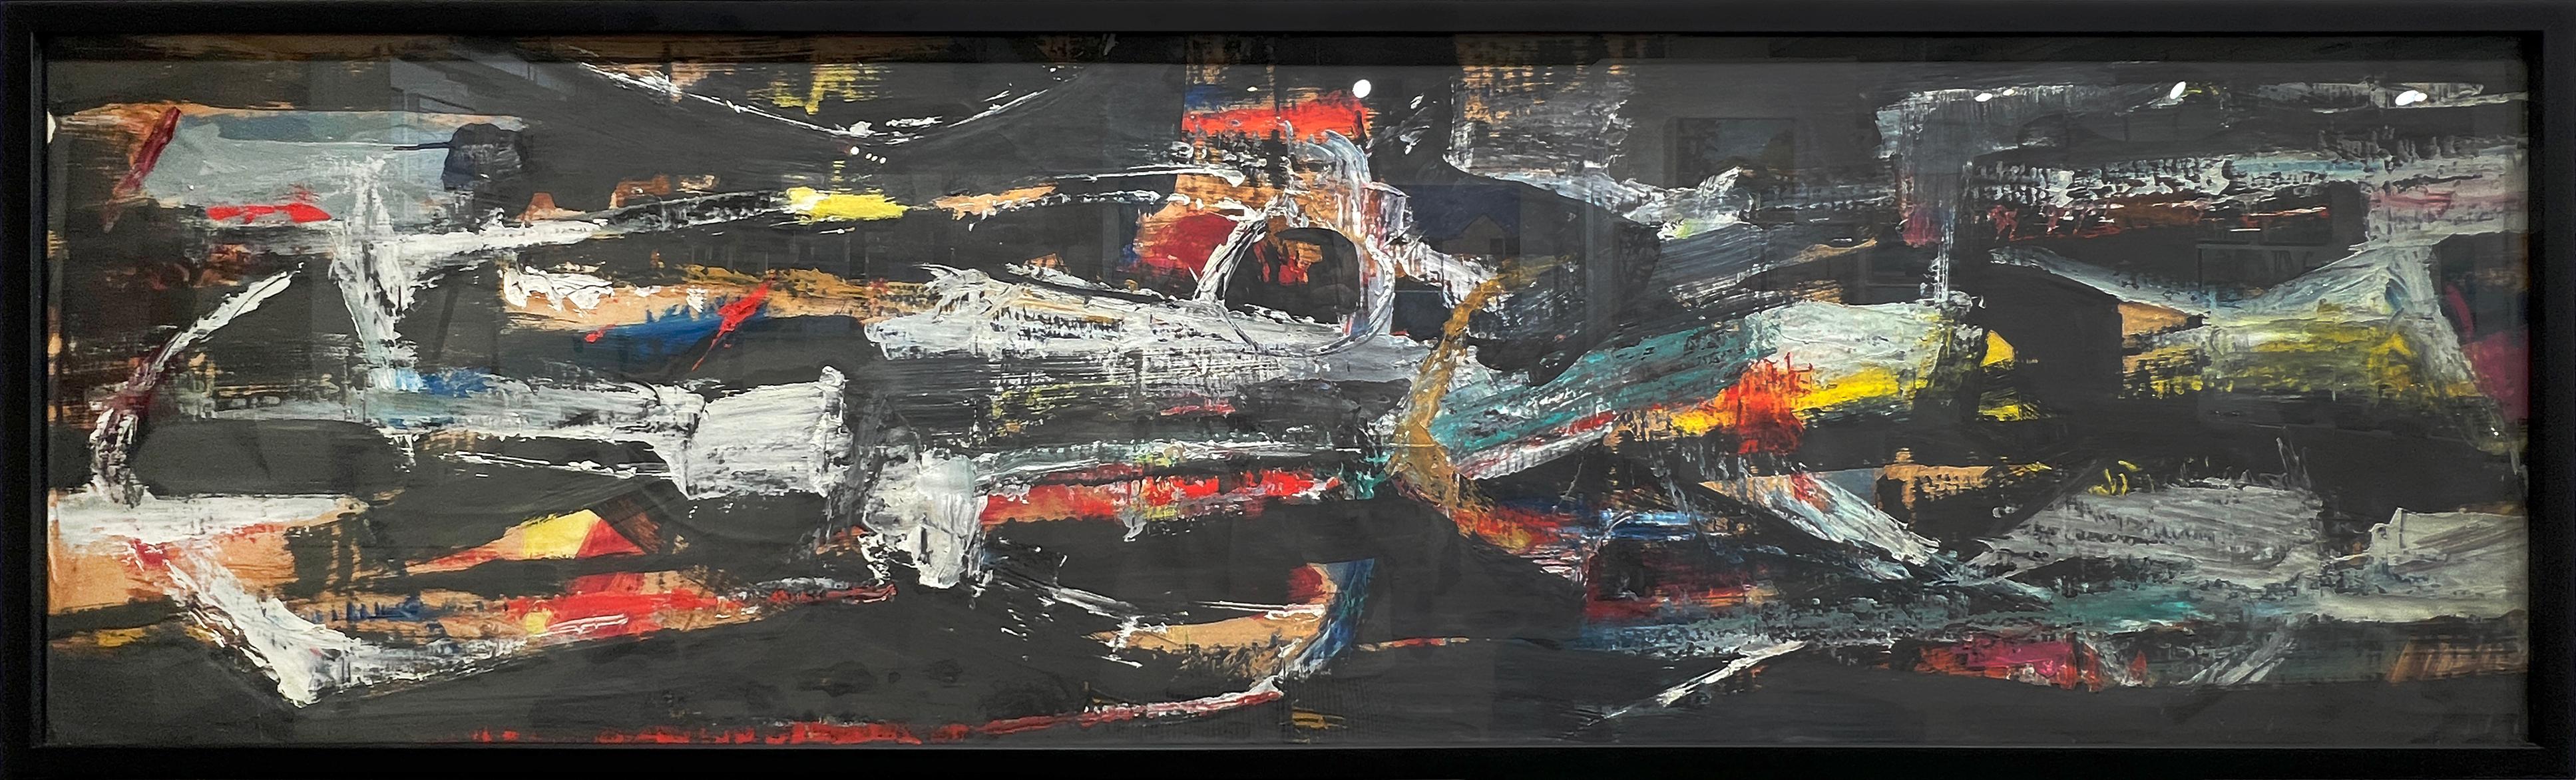 Abstract Painting Stanley Bate - Untitled #128, peinture abstraite moderne des années 1960